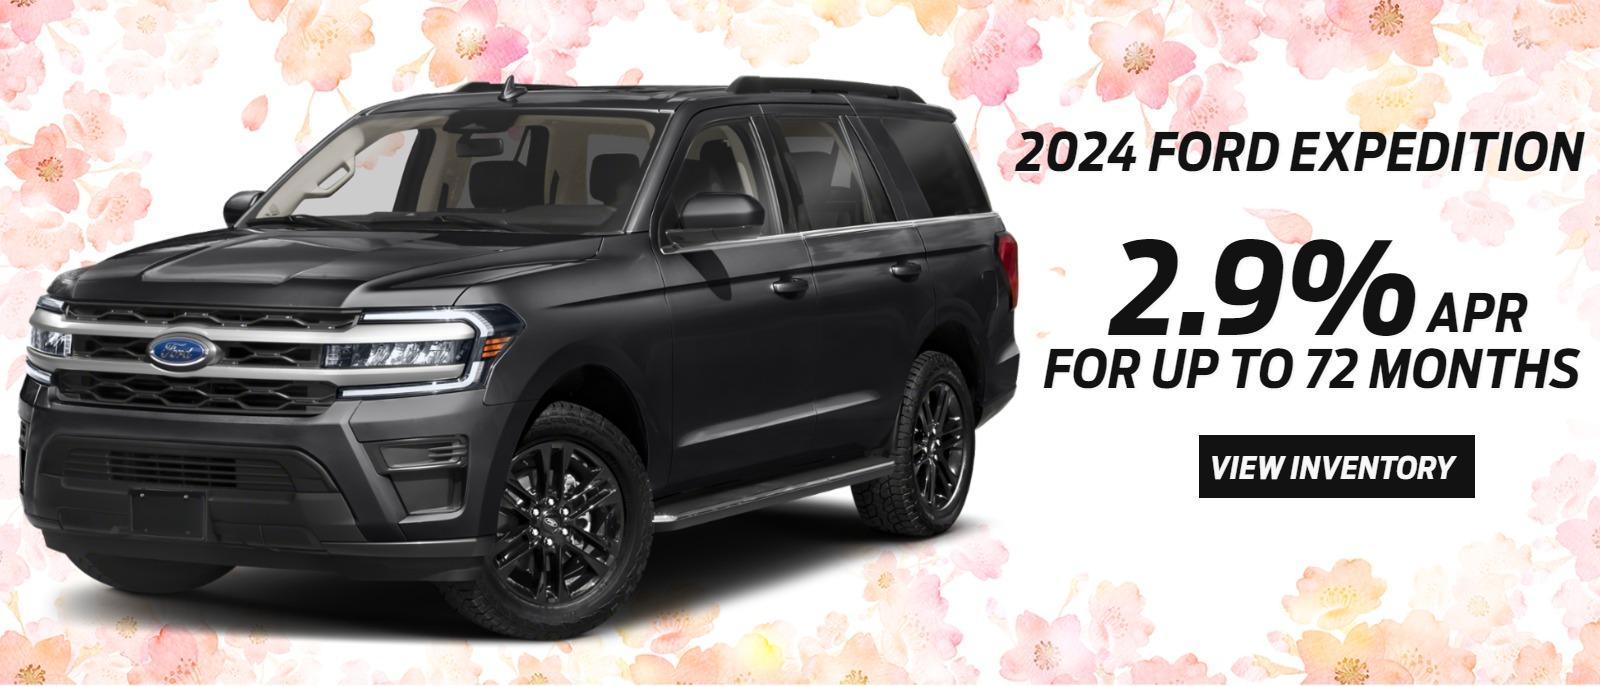 2024 Ford Expedition: 2.9% APR for up to 72 months!